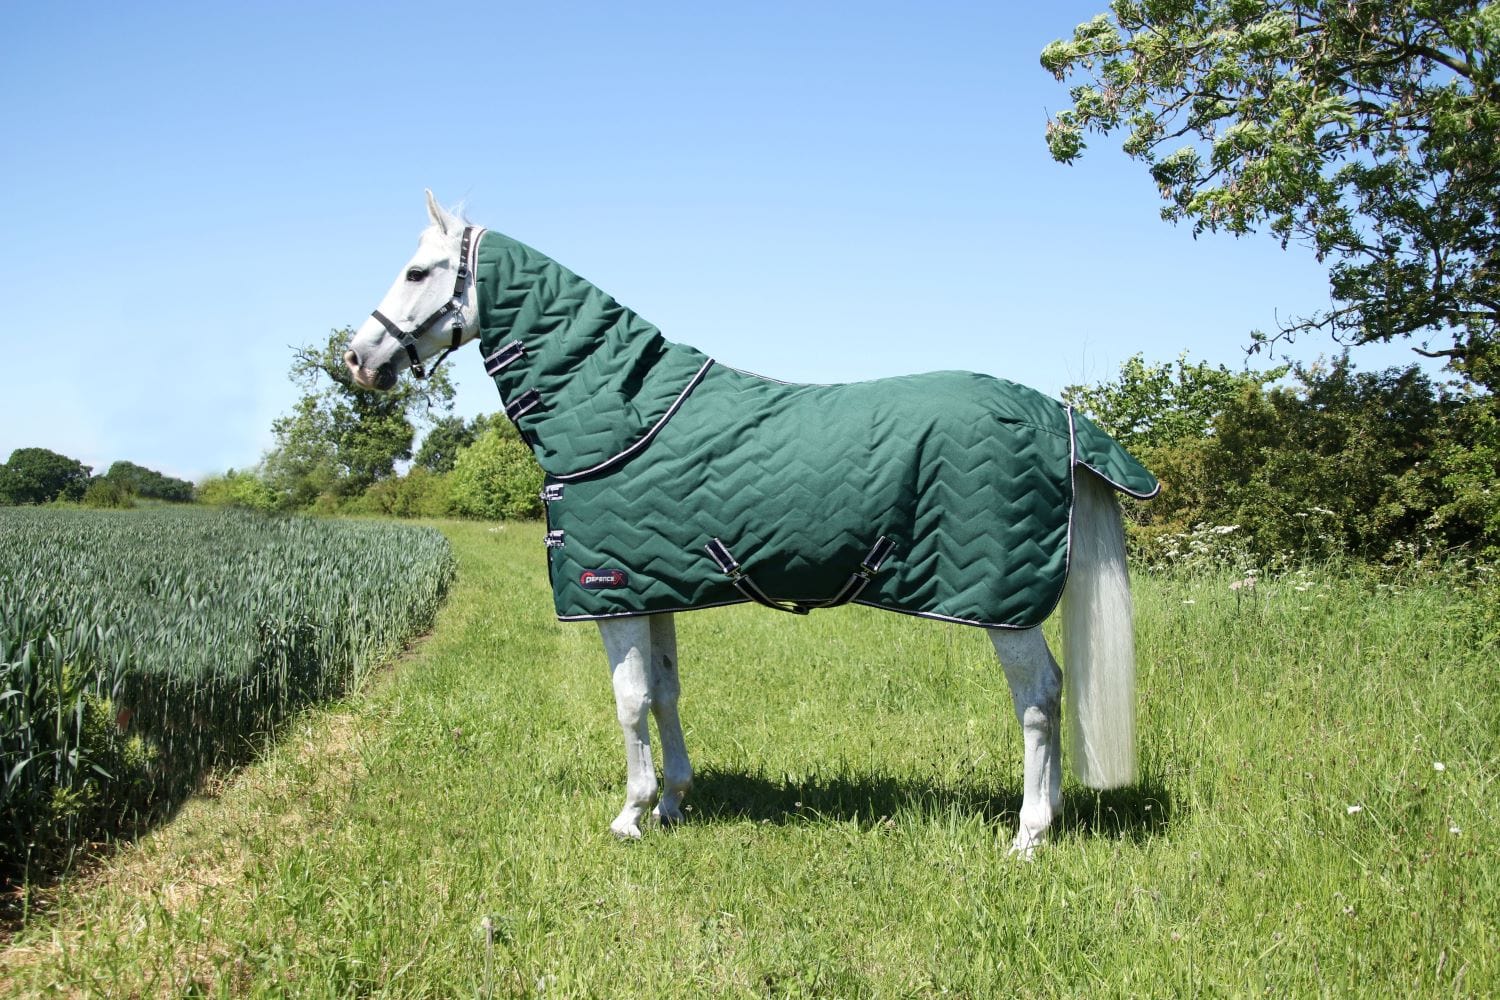 Defencex system 100 stable rug with detachable neck cover